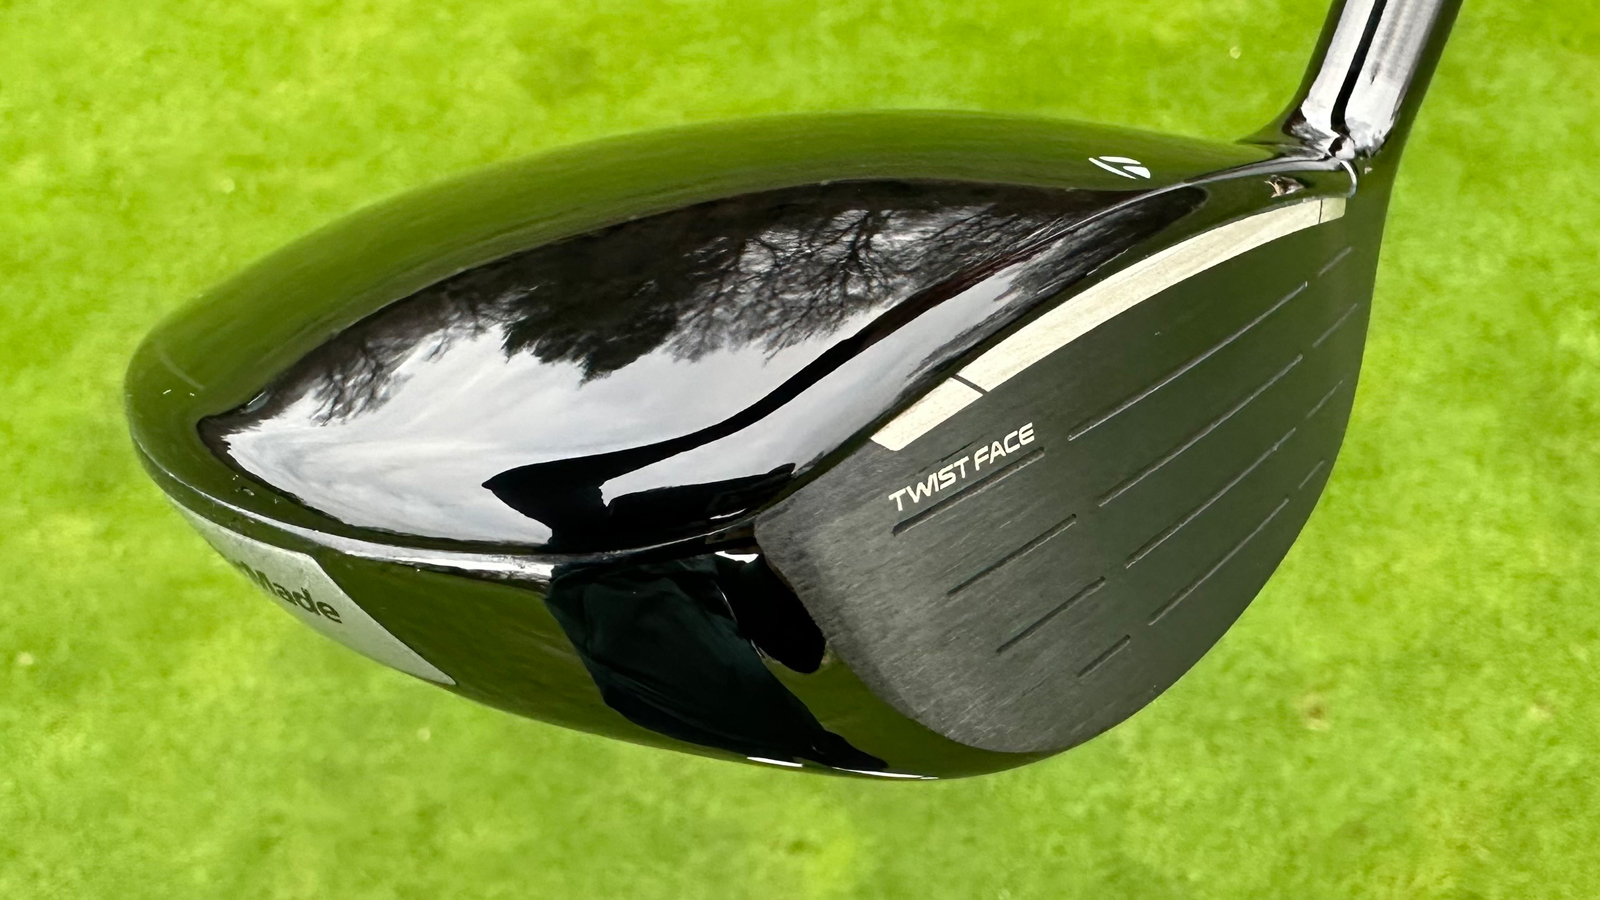 TaylorMade Qi10 Max Fairway Wood Review